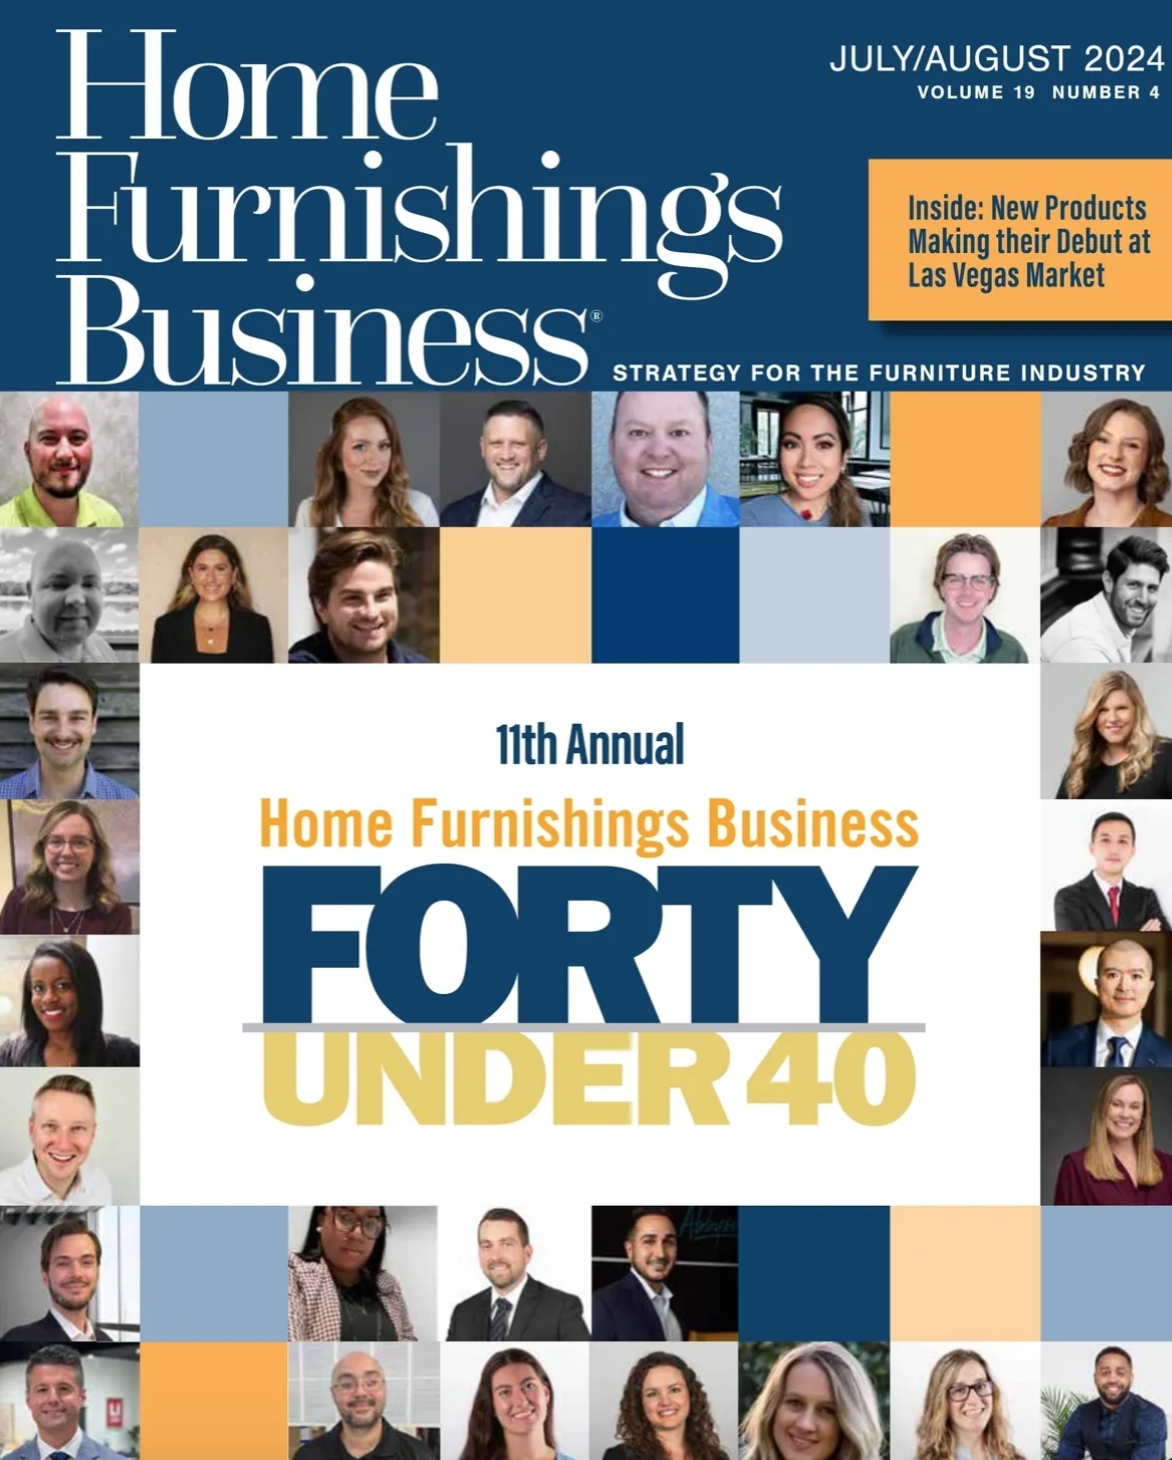 Home Furnishings Business July/august 2024 Magazine